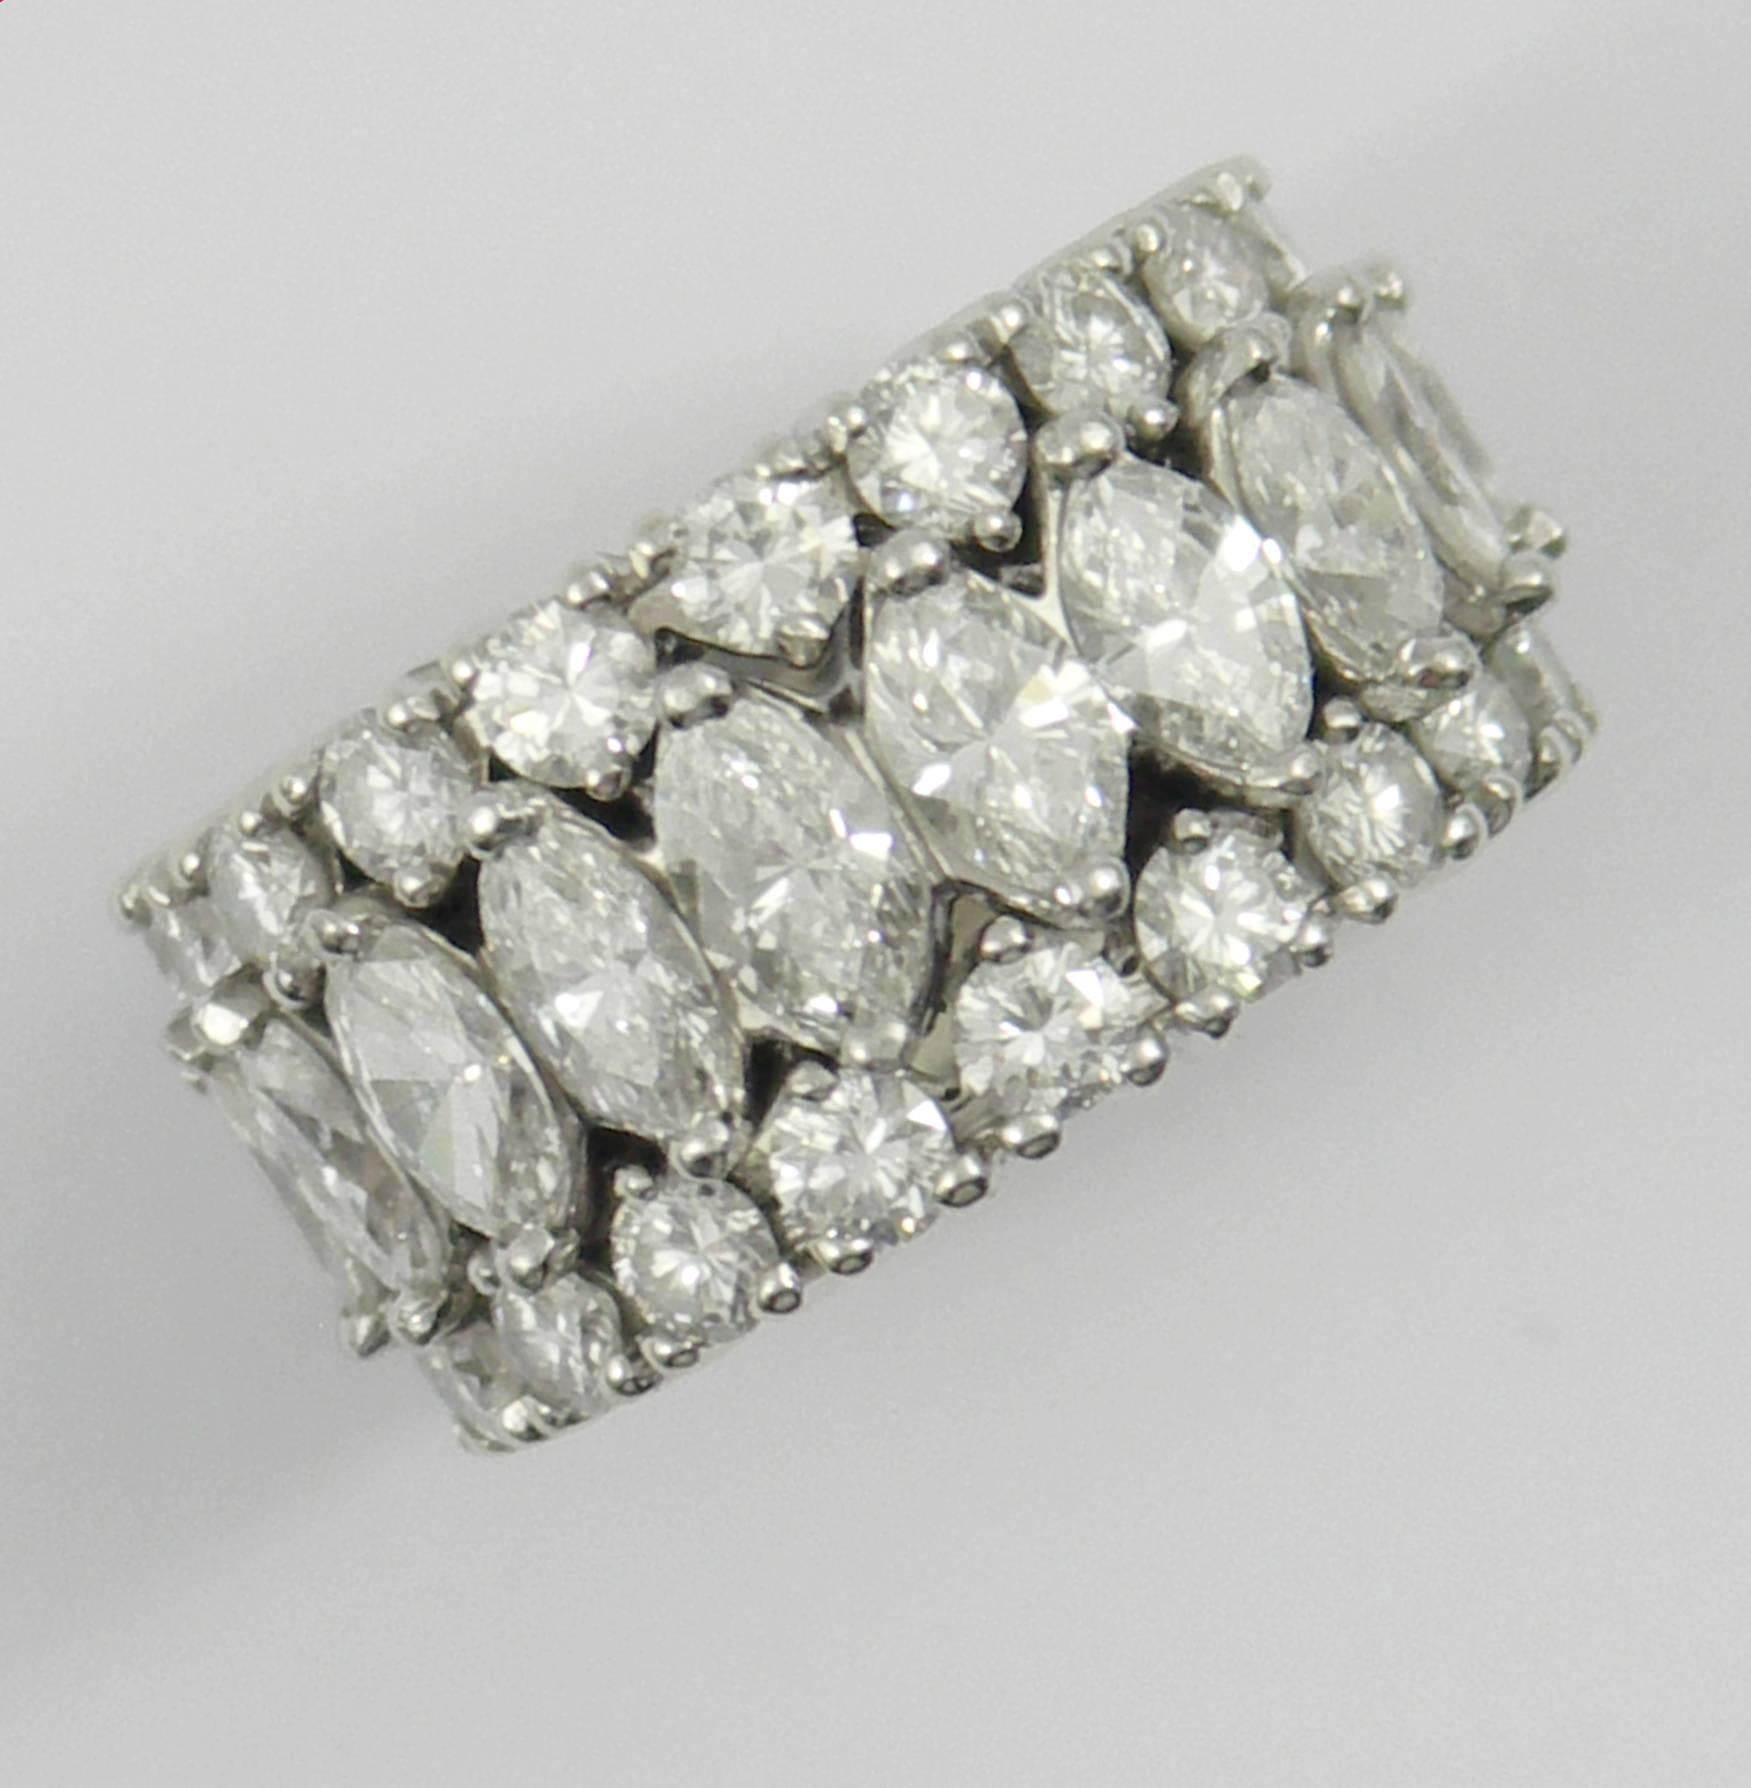 One ladies platinum band set with 23 marquise cut diamonds weighing 3 carats total approximate weight, and 50 round brilliant cut diamonds weighing 3 1/2 carats total approximate weight. This stunning ring tapers in width from 7/8 of an inch, down